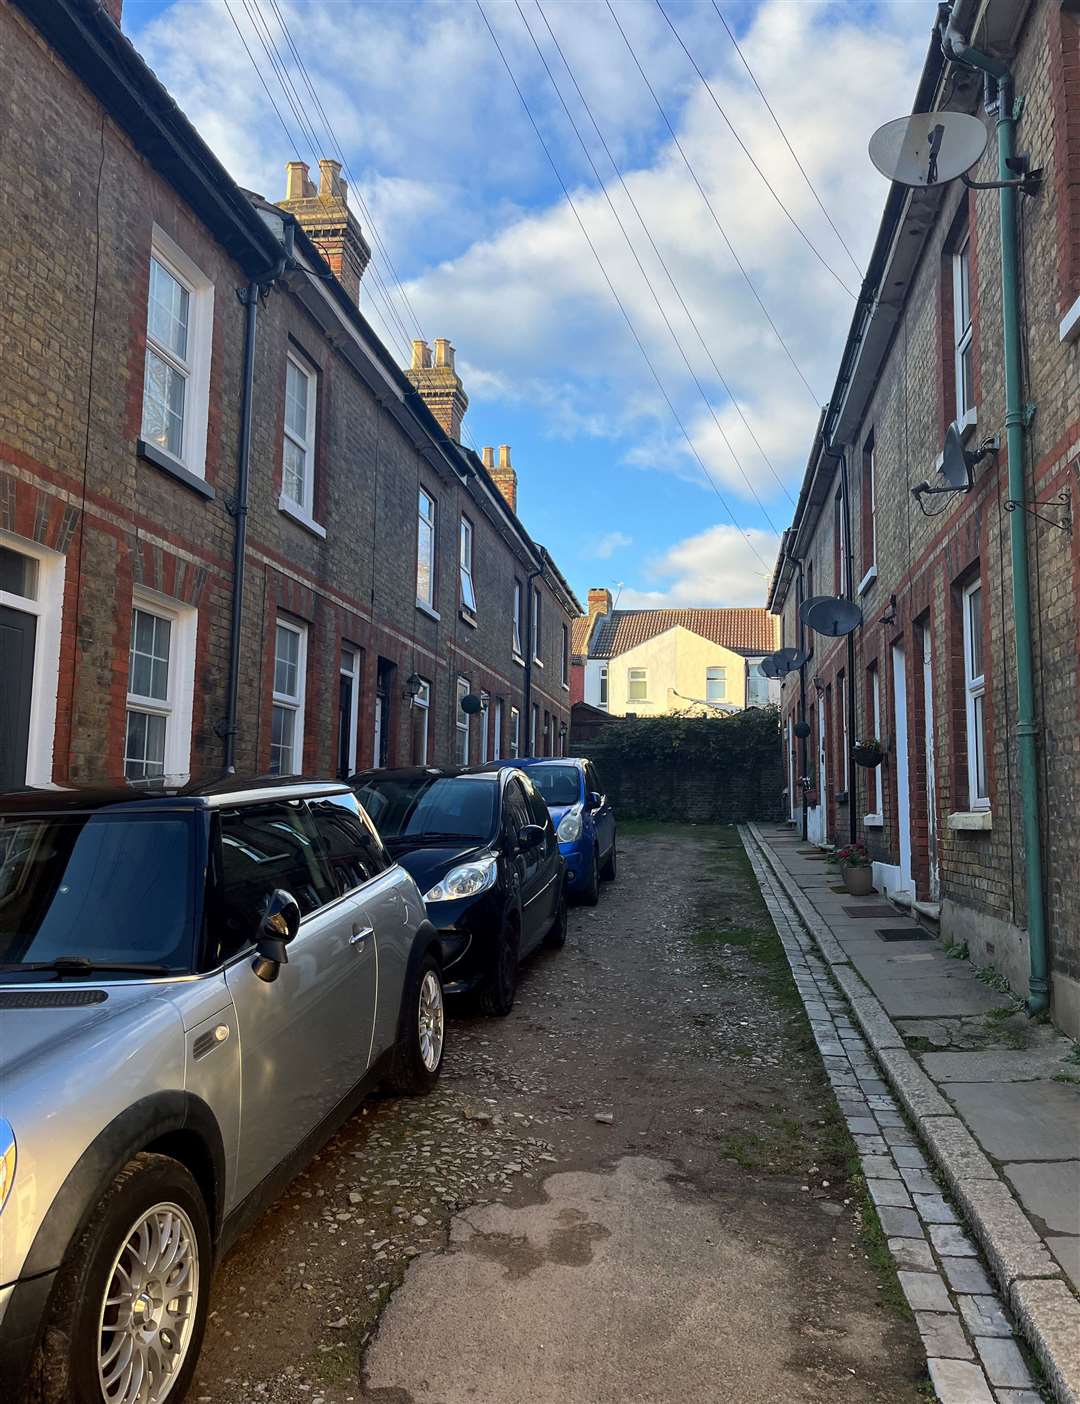 There are 16 houses in Florence street but limited space for cars